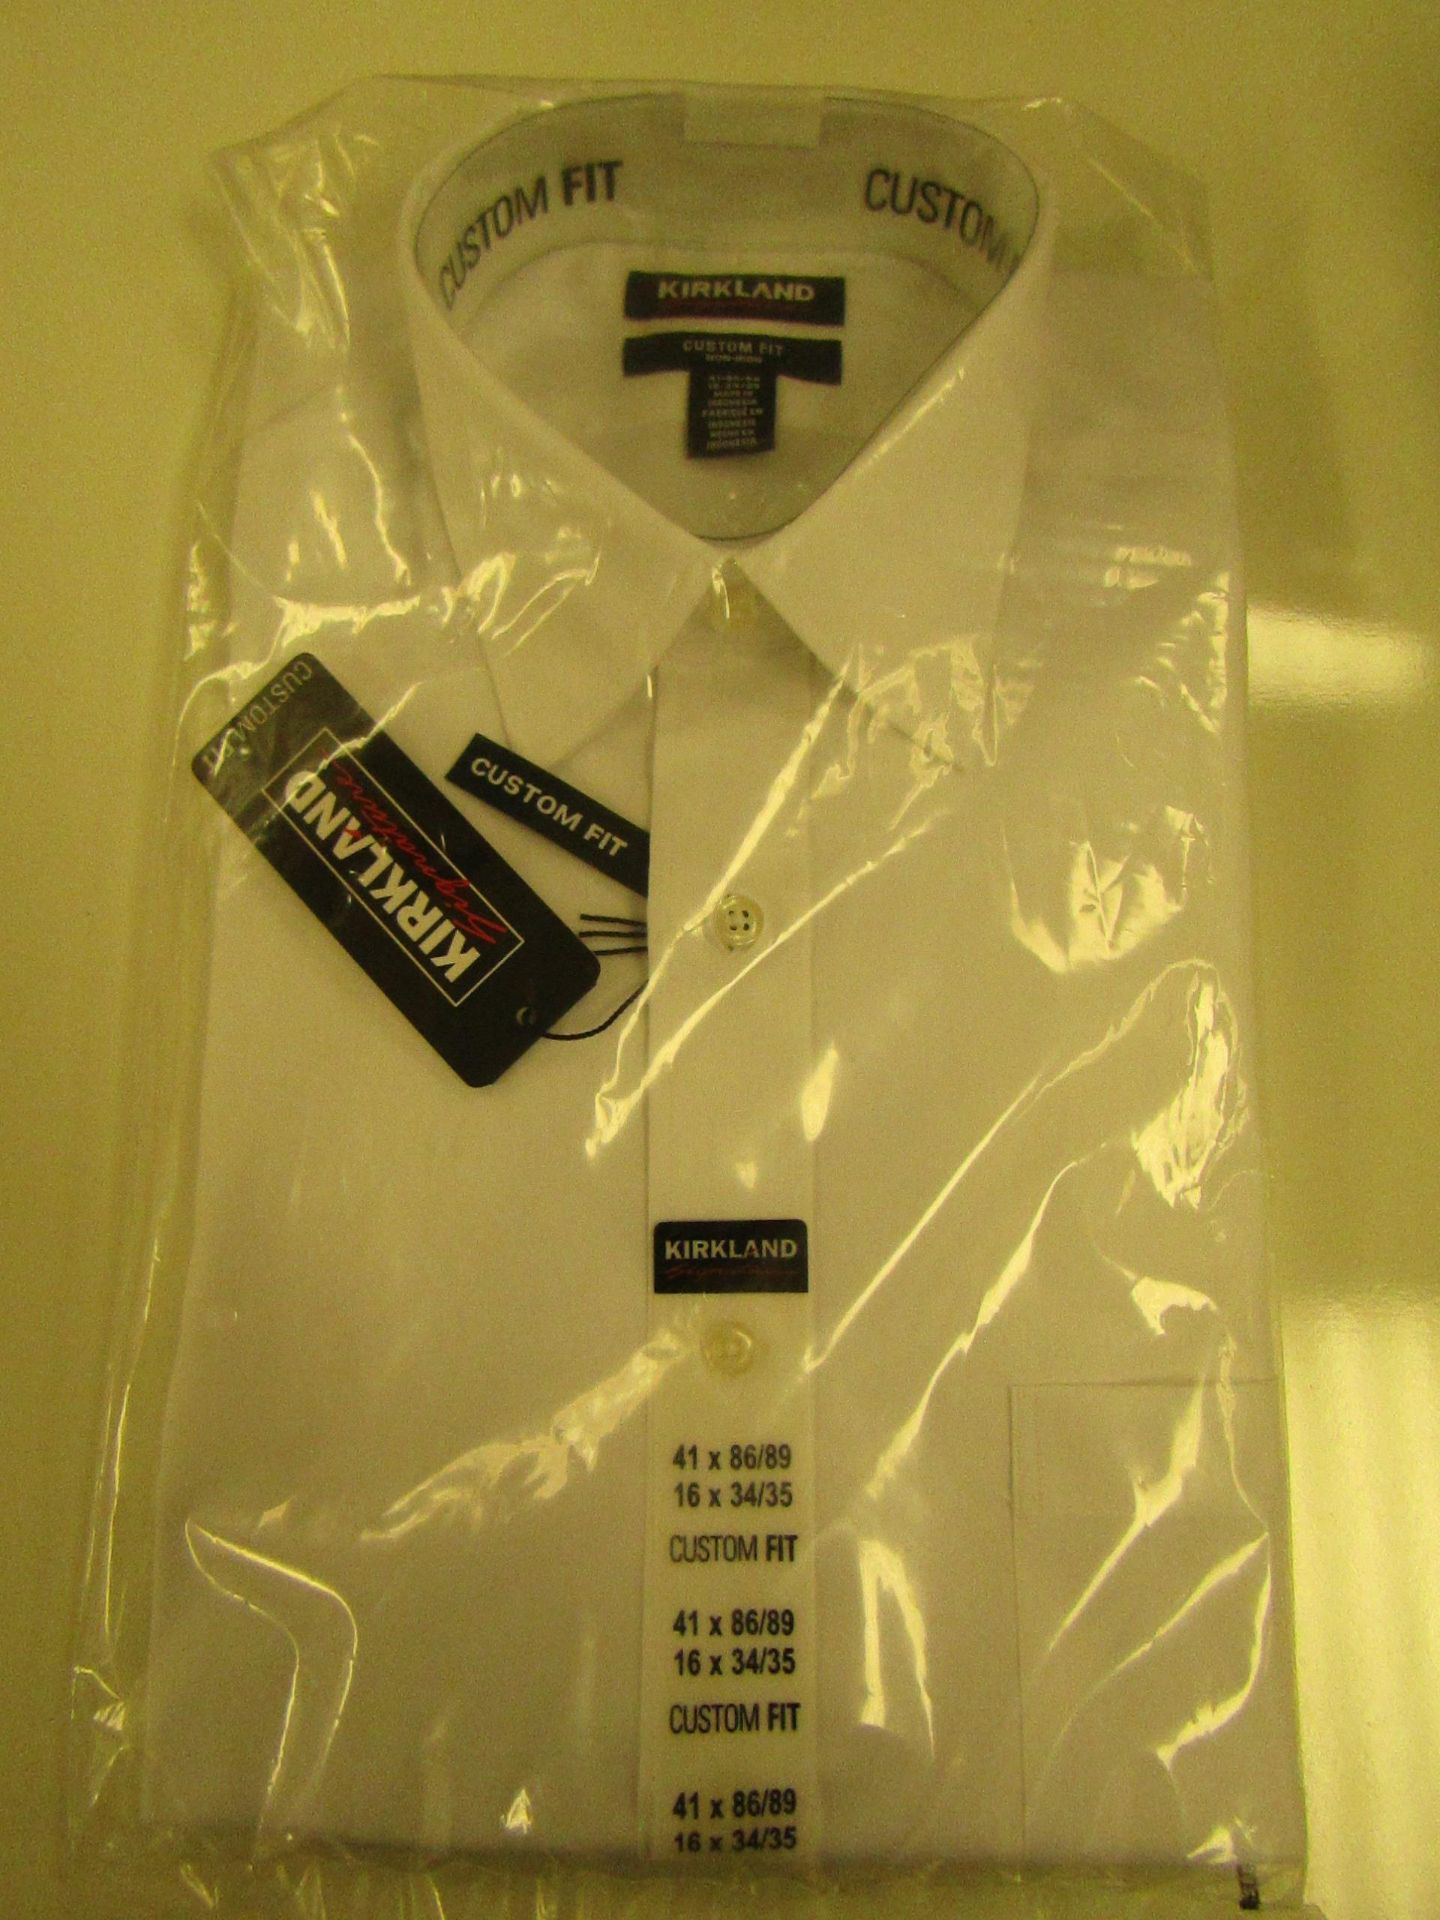 Kirkland Signature Custom Fit White Long Sleeve Shirt Size 16" X 32/33 New in Packaging